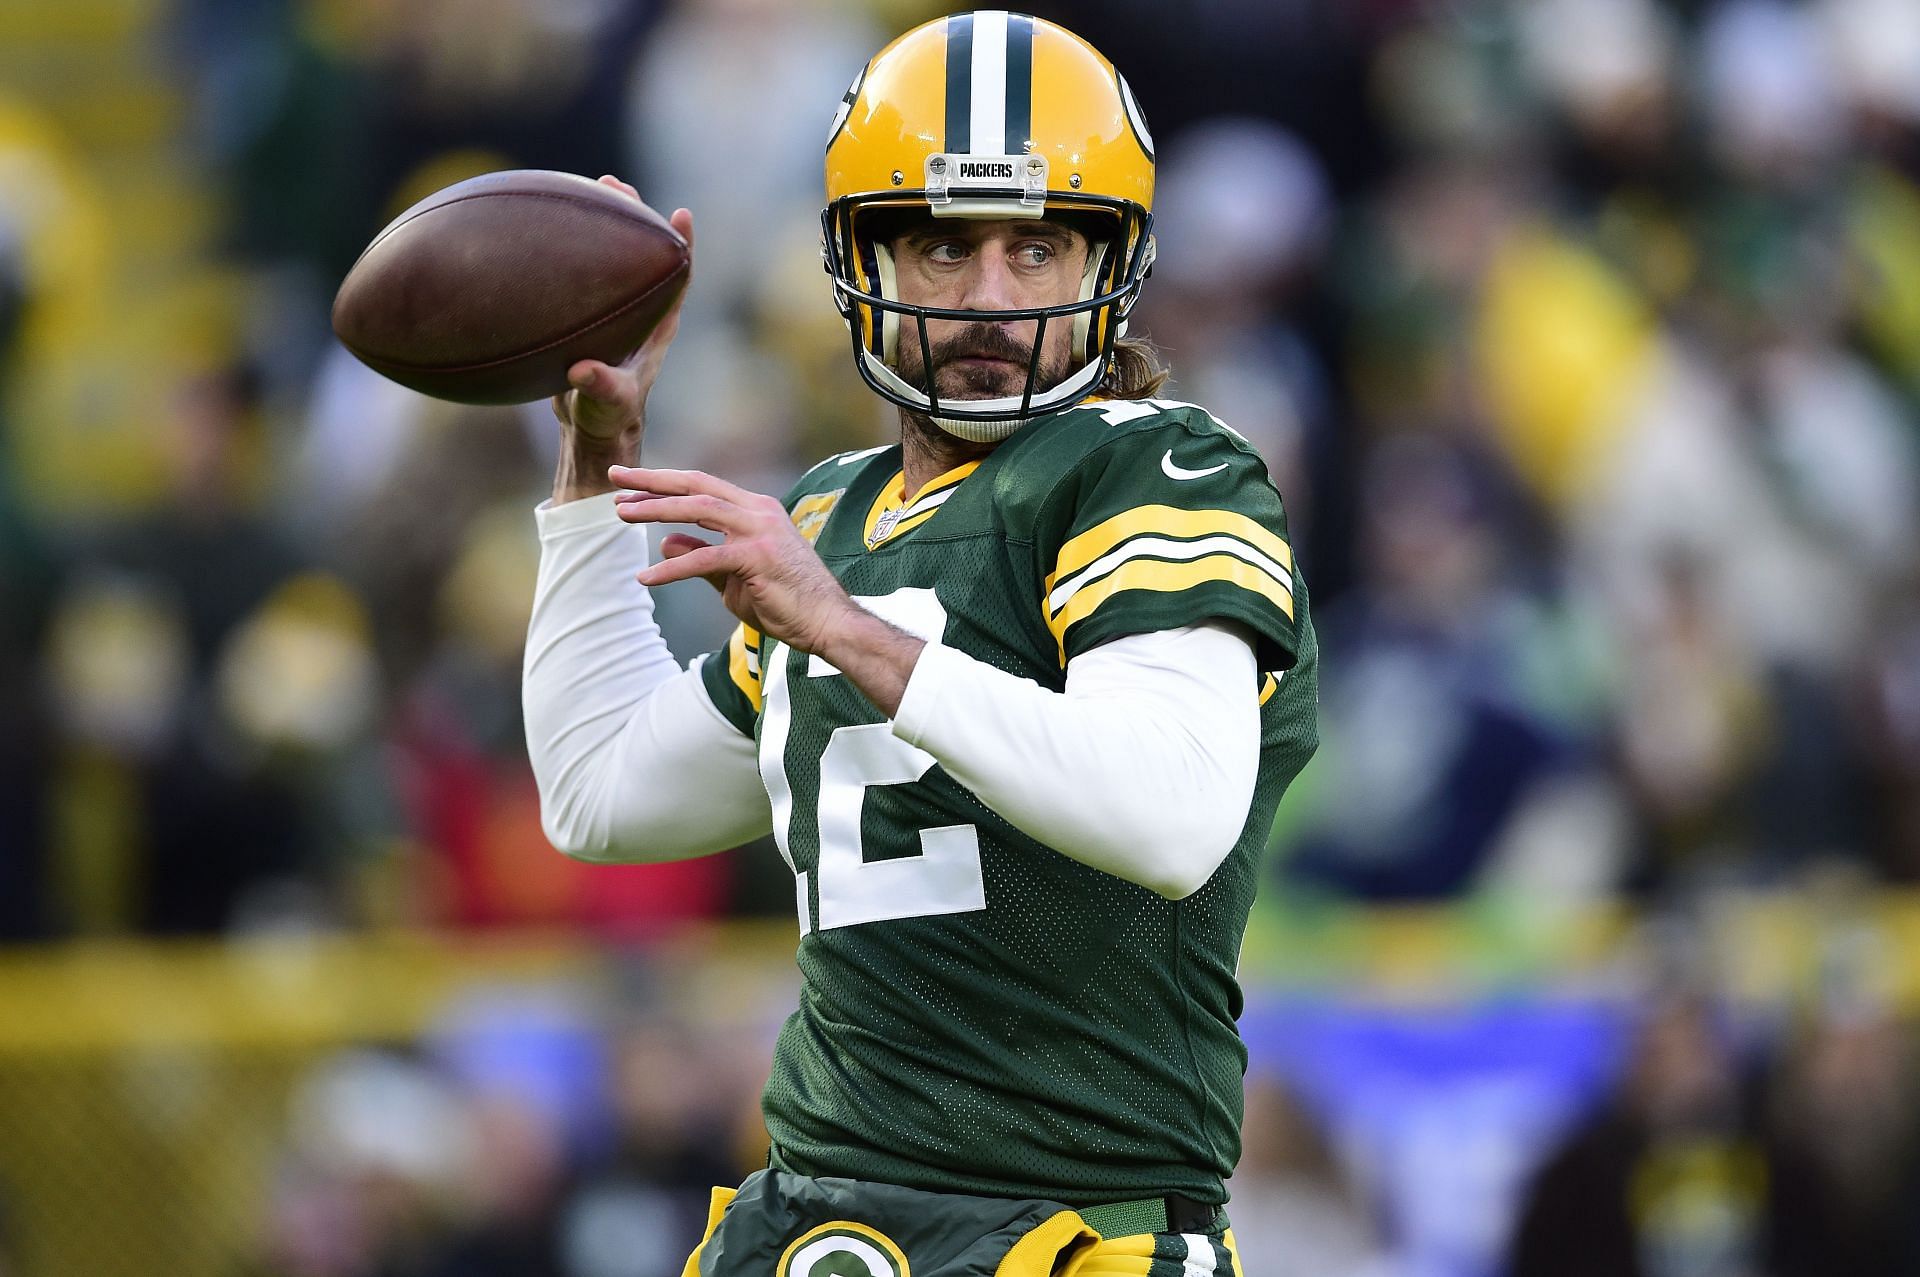 Packers QB Aaron Rodgers calls award voter 'a bum' following